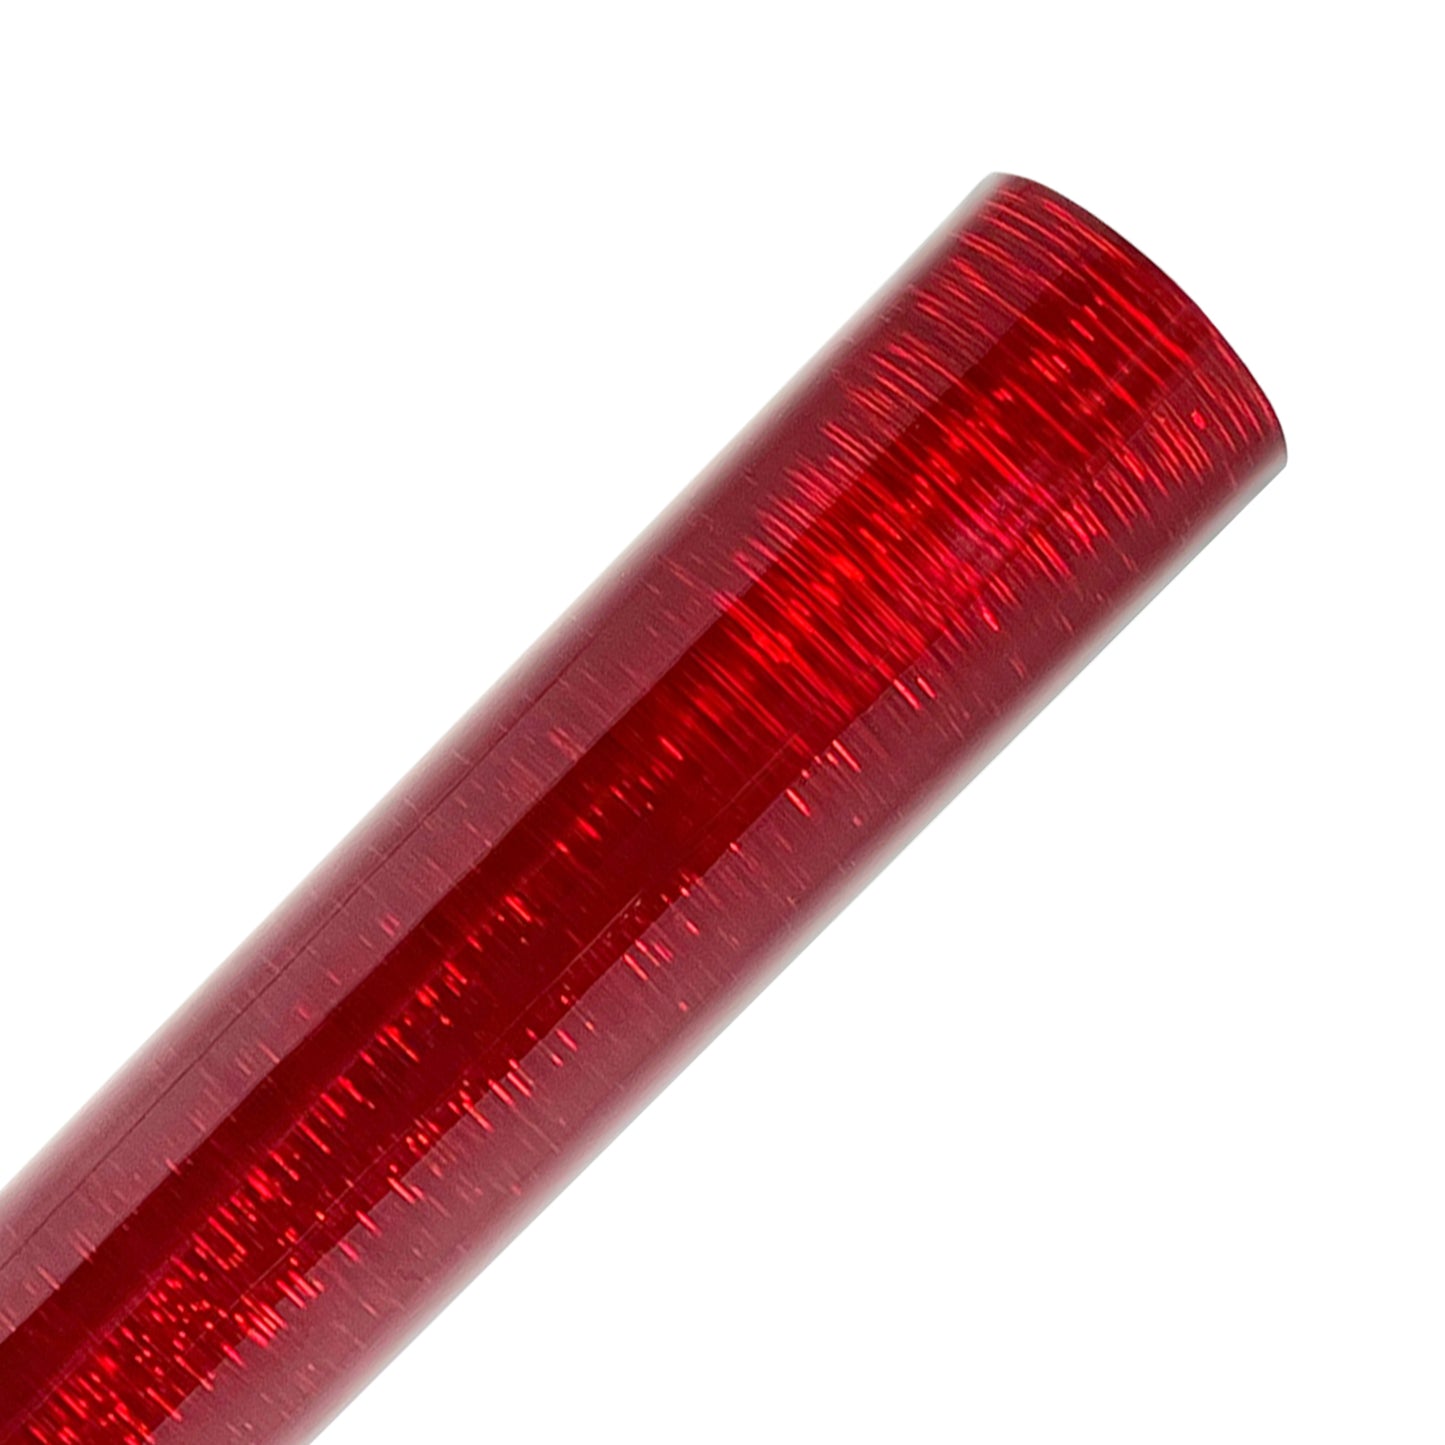 Red Brushed Holographic Adhesive Vinyl Rolls By Craftables